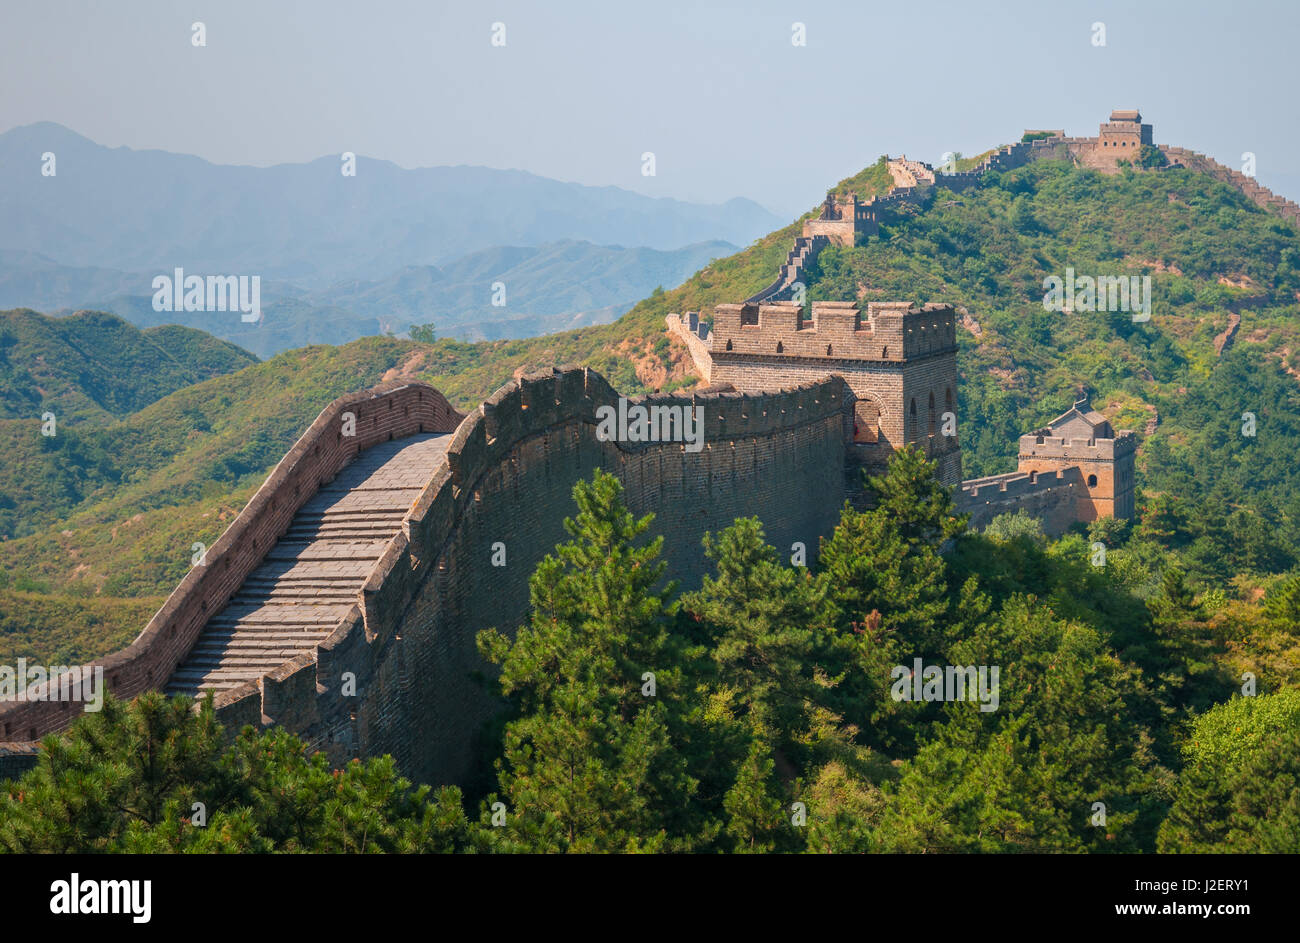 The Great Wall of China in Jinshanling without tourists near Beijing, China. Stock Photo